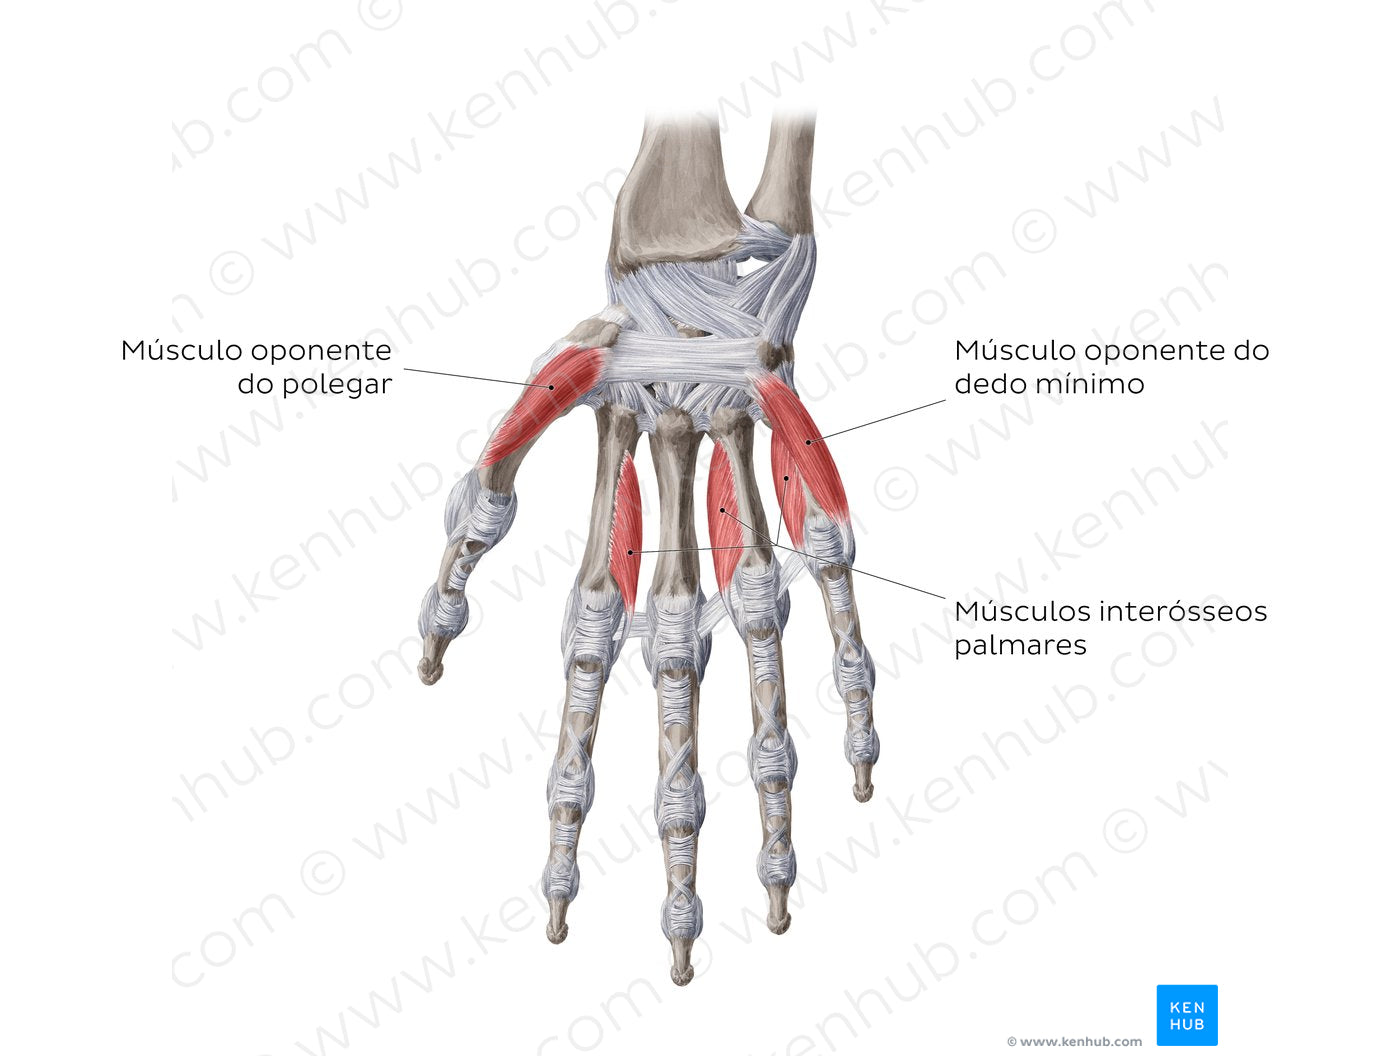 Muscles of the hand: deepest muscles (Portuguese)